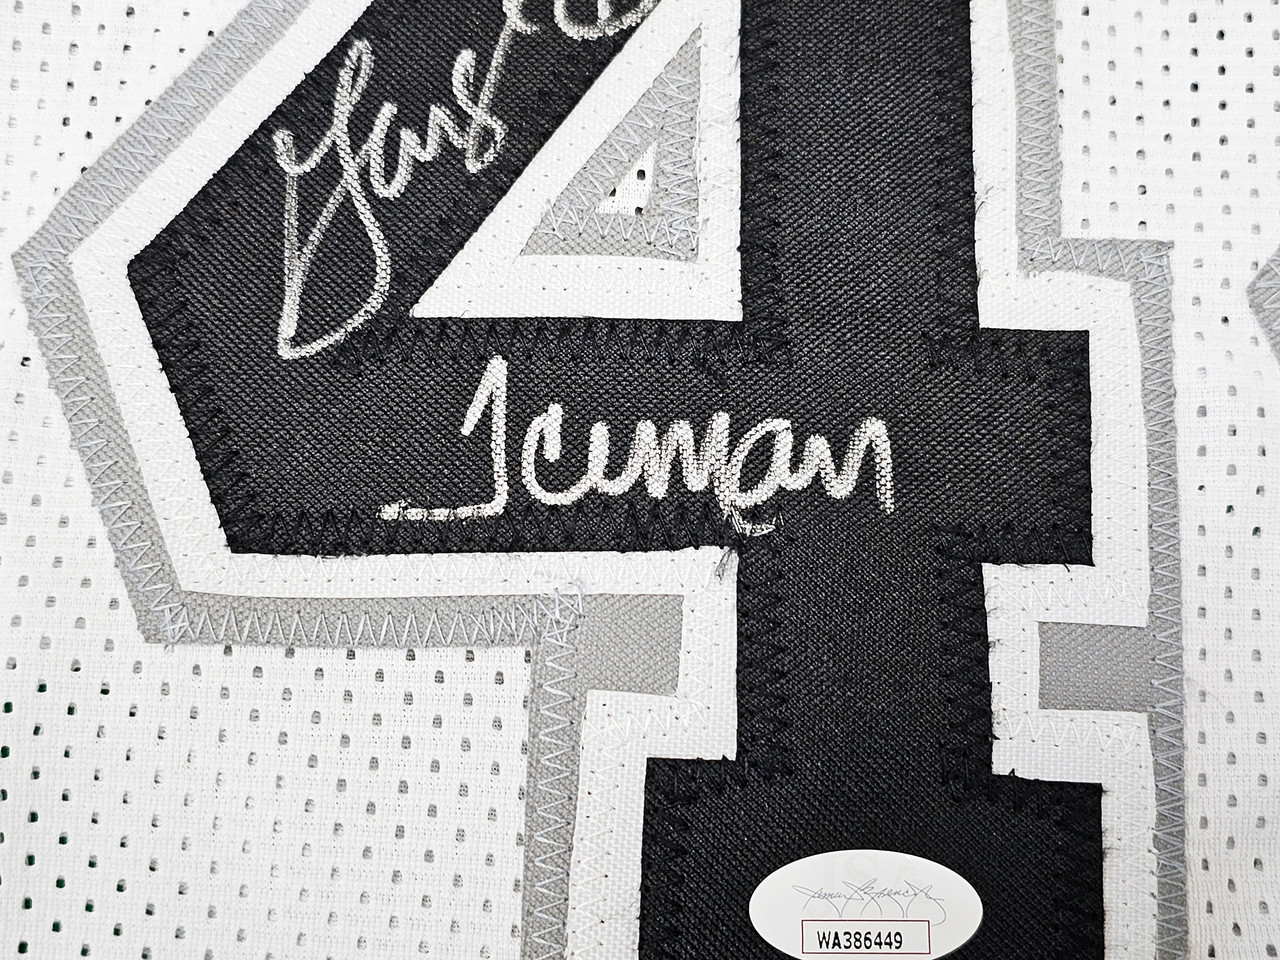 George Gervin Signed “Ice Man” Jersey - CharityStars